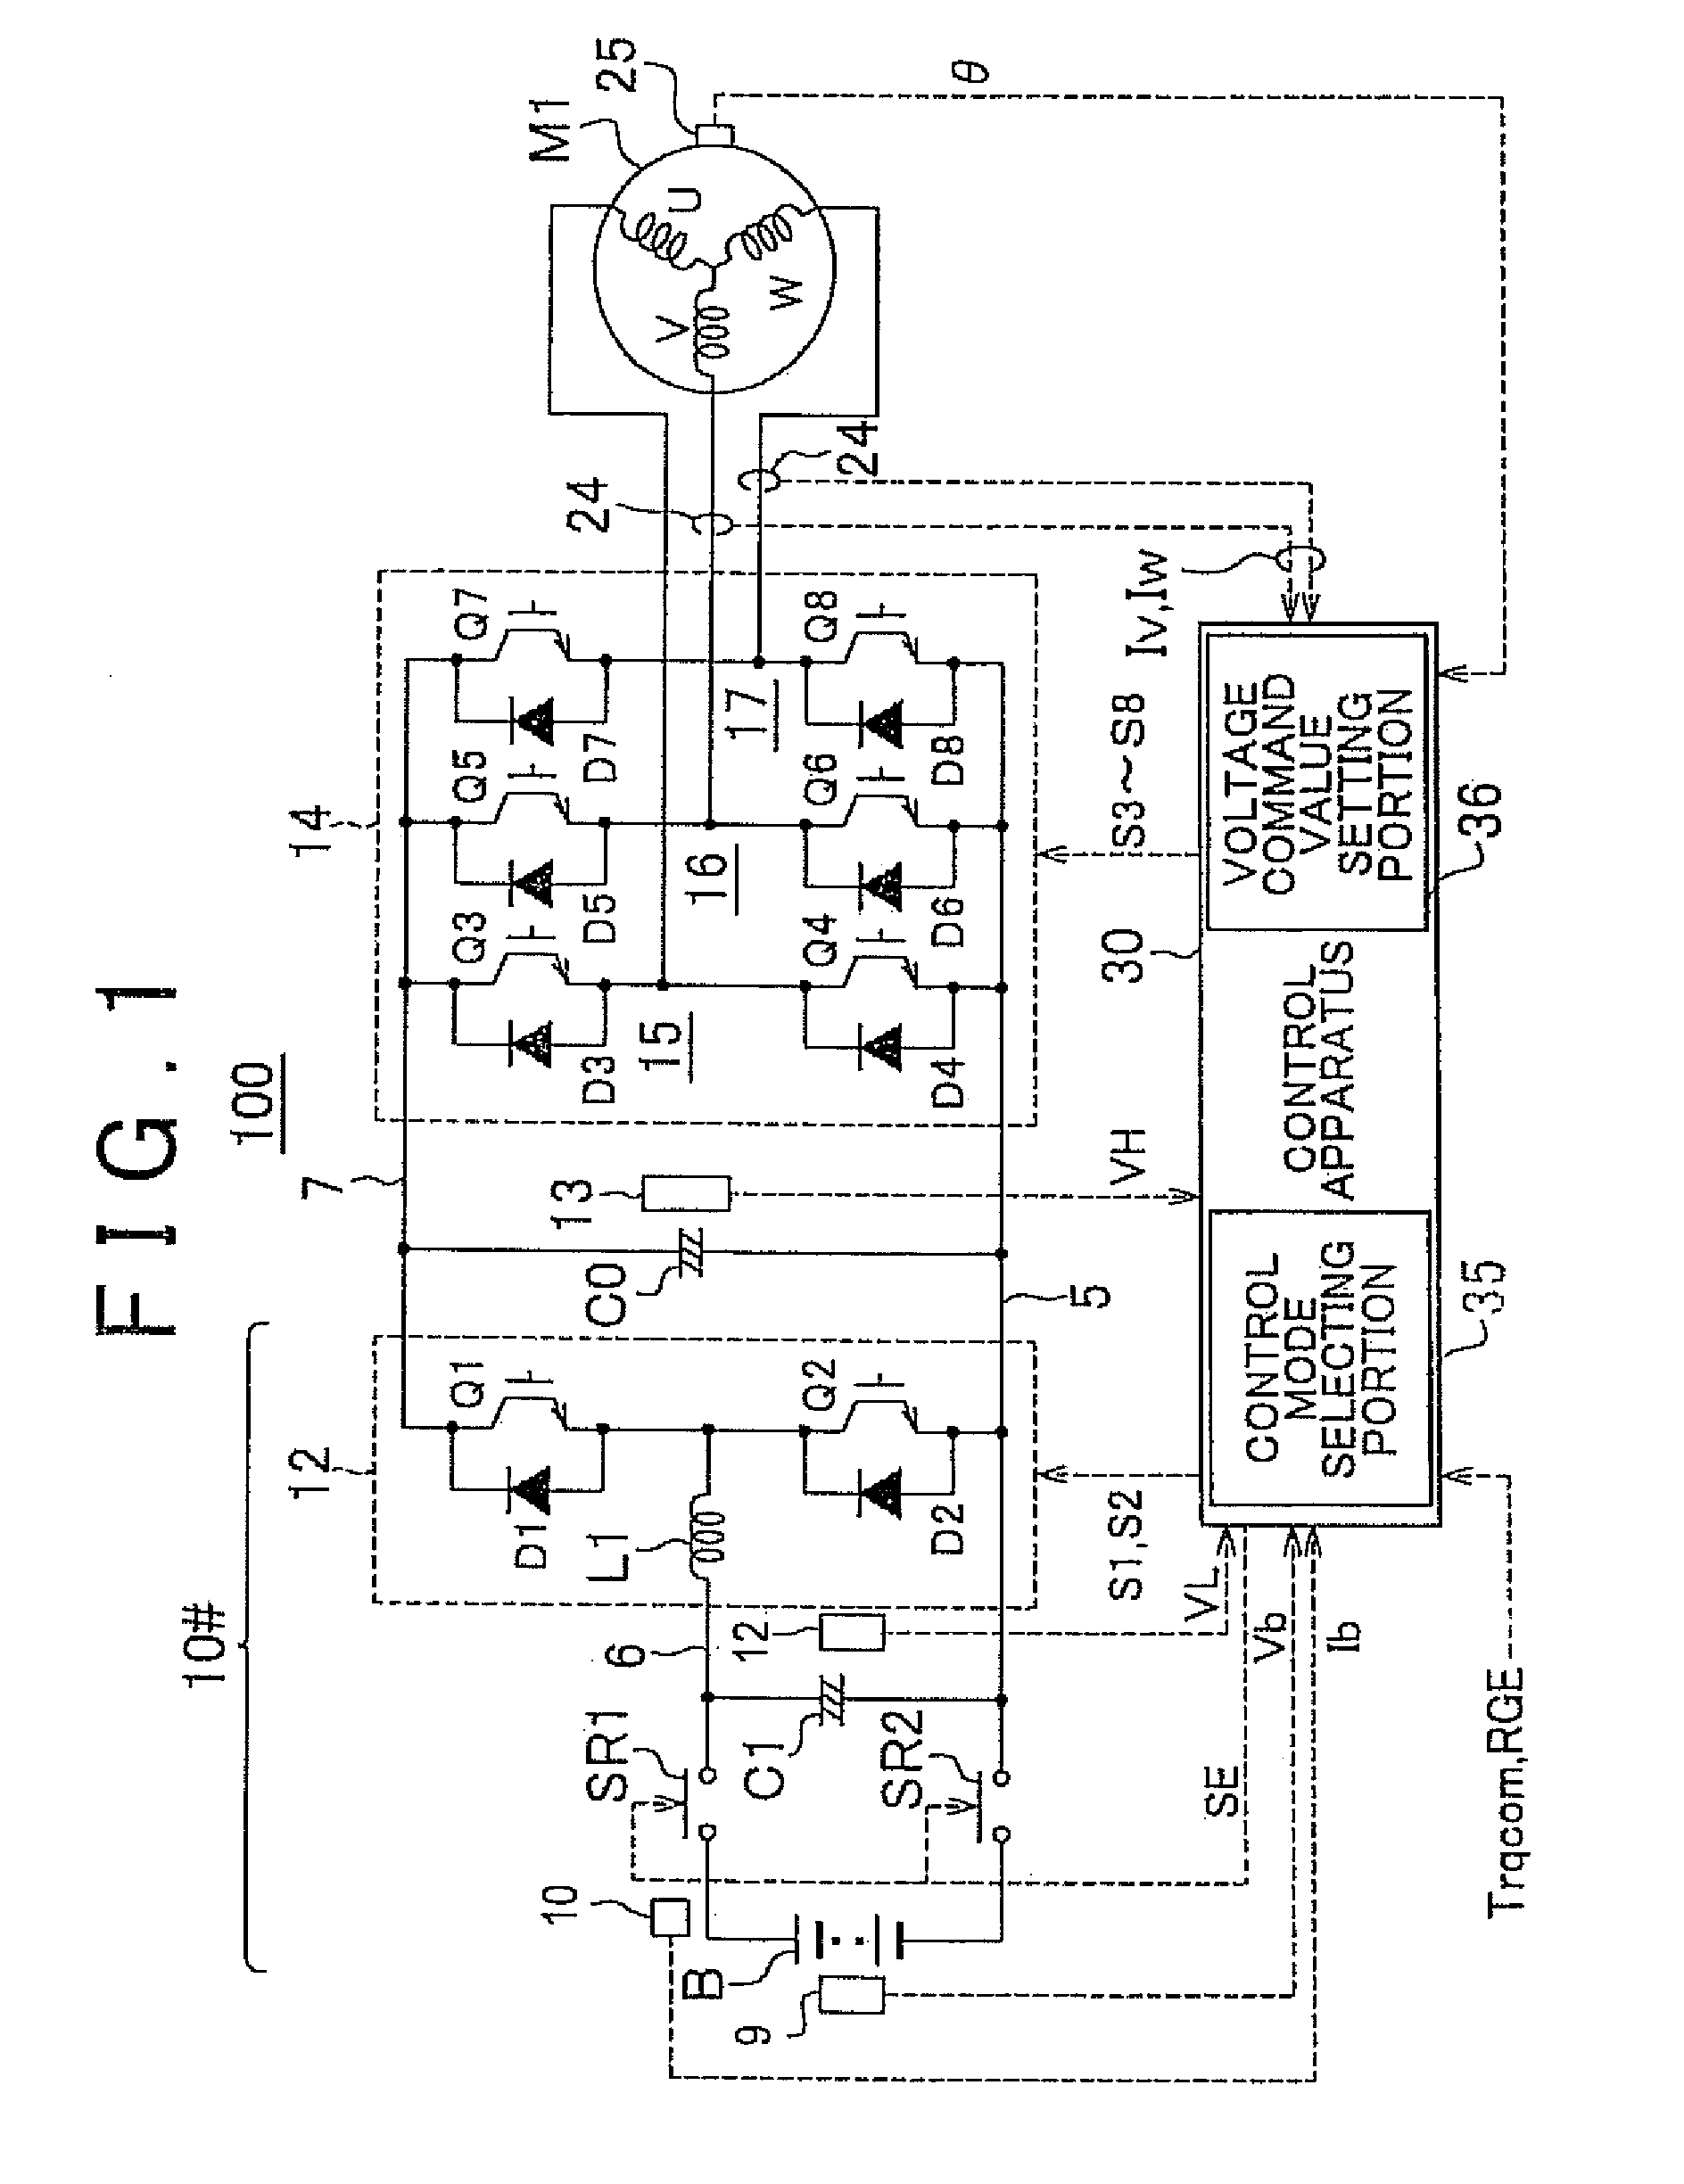 Electric motor drive system for an electric vehicle